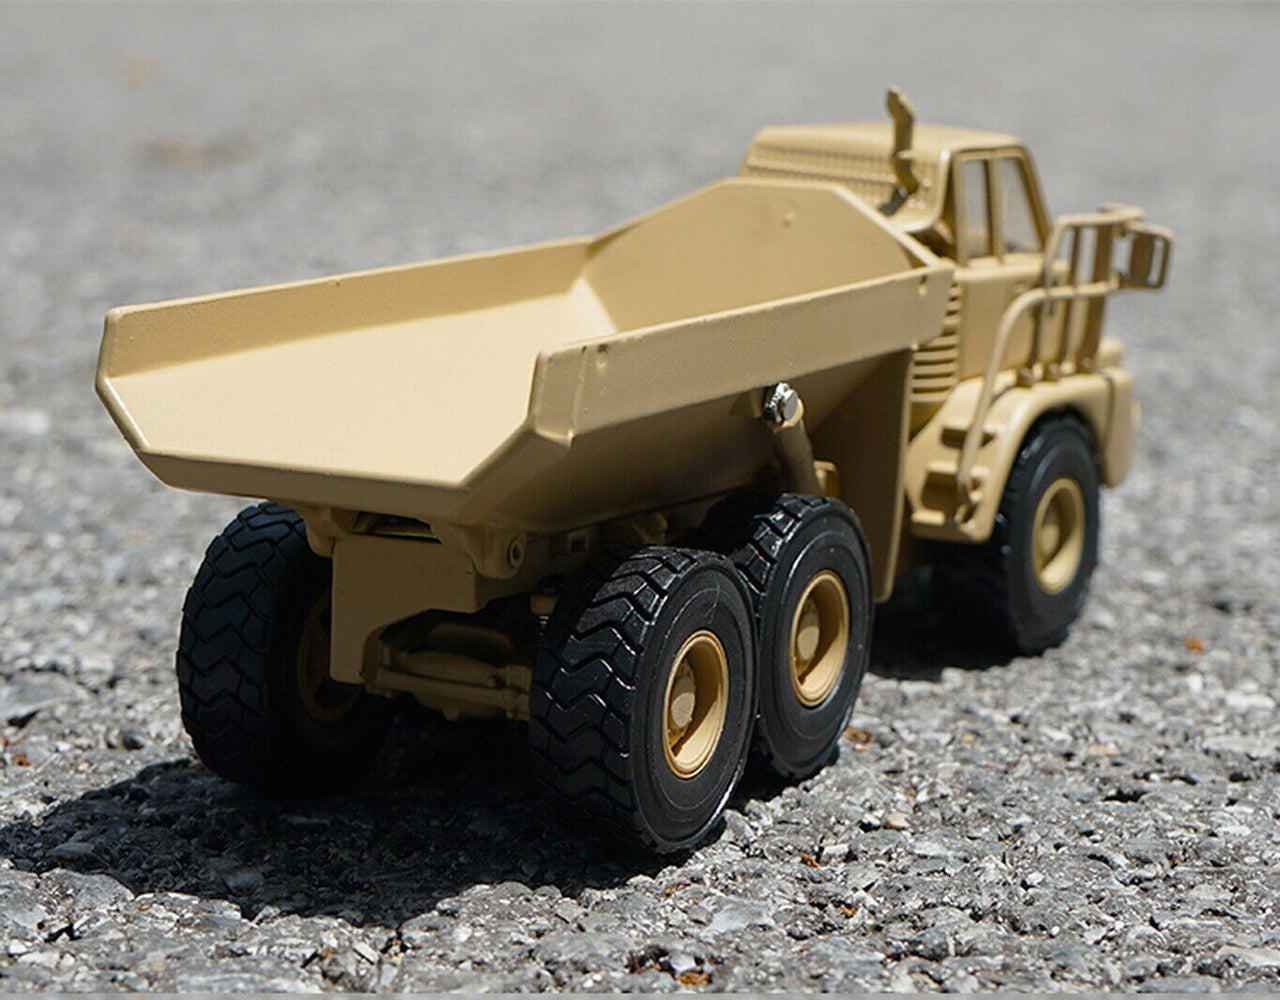 55251 Caterpillar 730 Military Articulated Truck 1:50 Scale (Discontinued Model) 